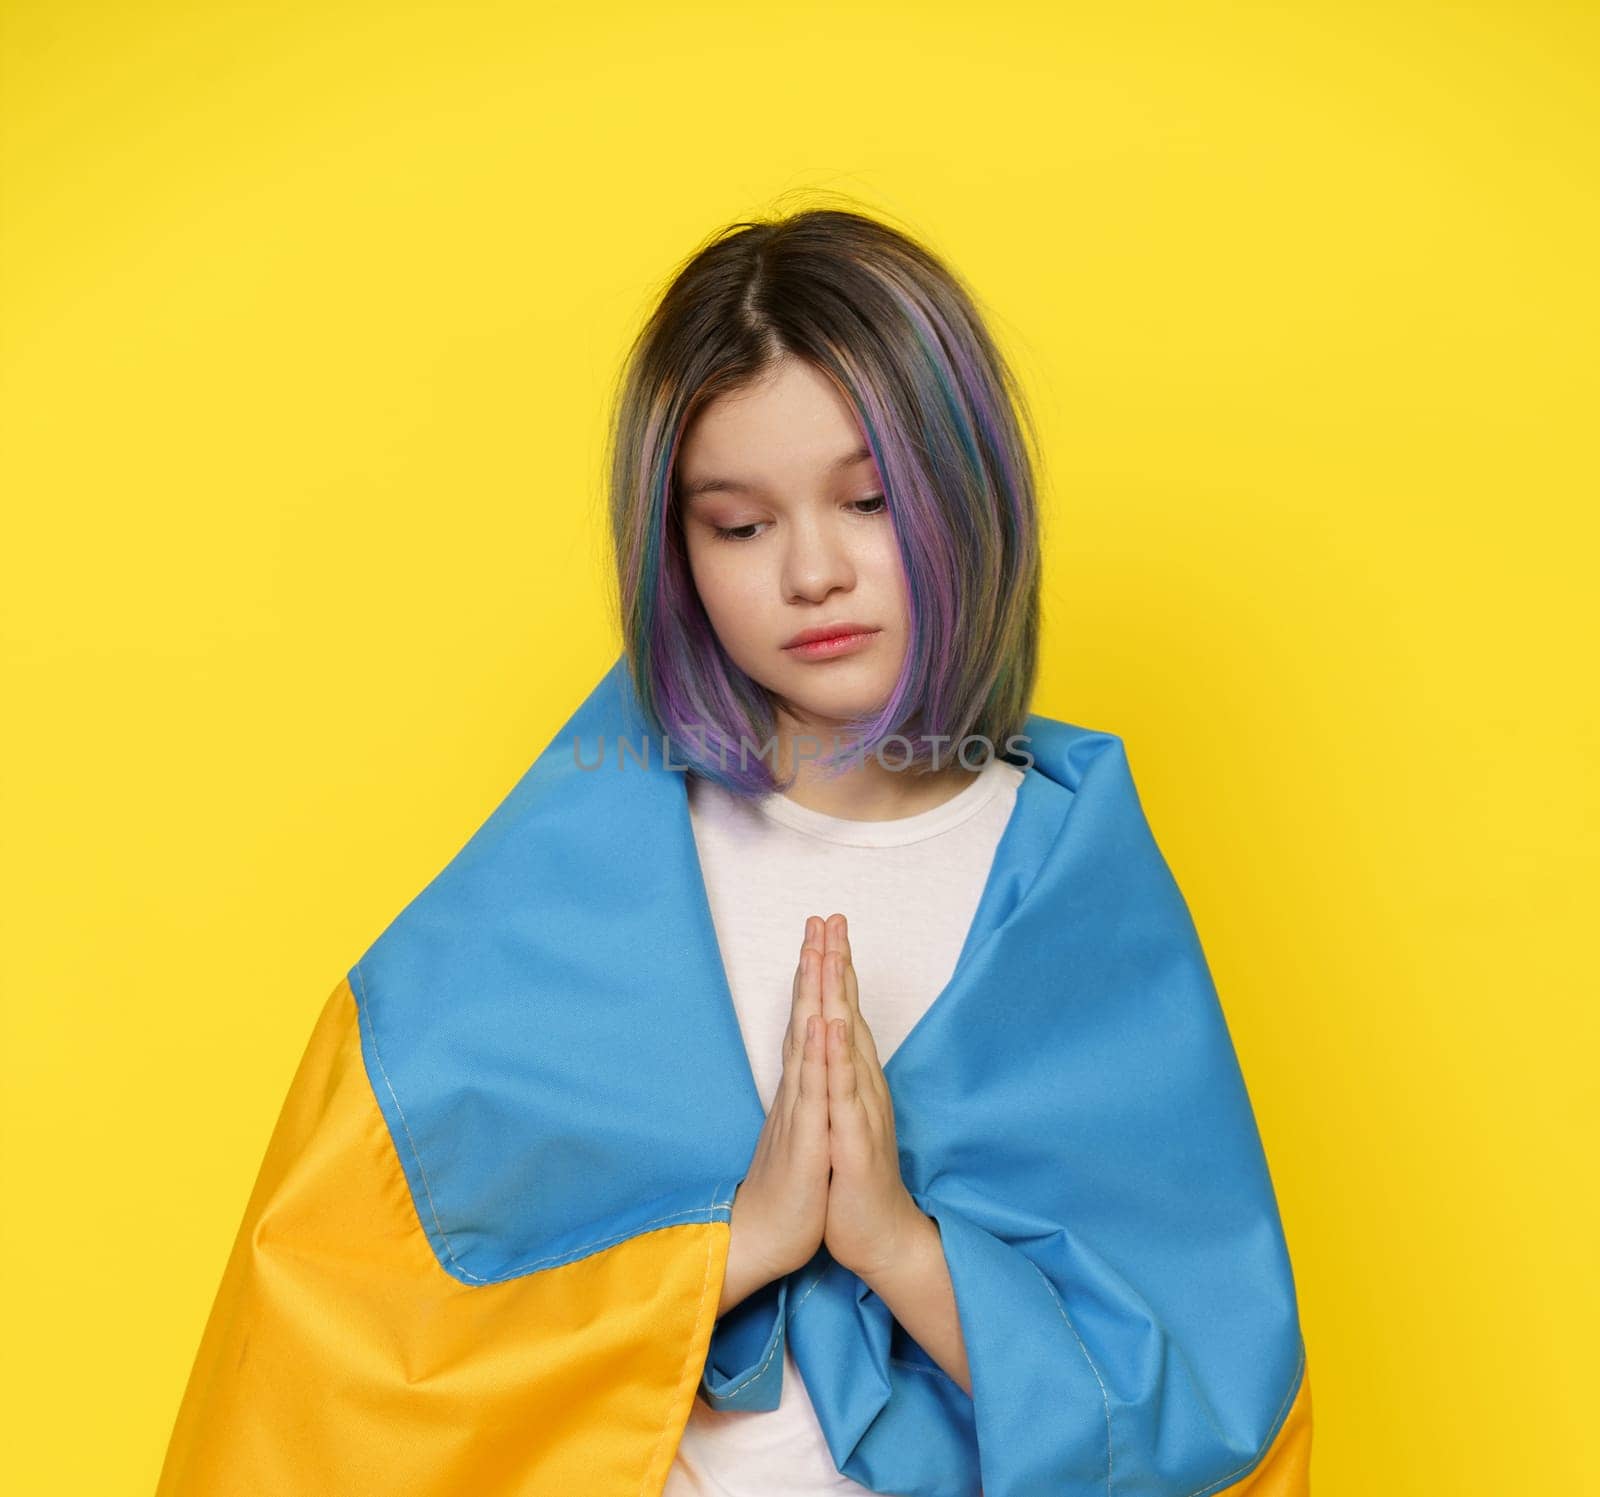 Girl Covers Herself With The Ukrainian Flag And Prays For Quick Peace Agreement In Ukraine, Amidst Ongoing Conflict With Russia. Symbol Of Global Awareness And Support For Those Affected By Crisis In Ukraine. by LipikStockMedia